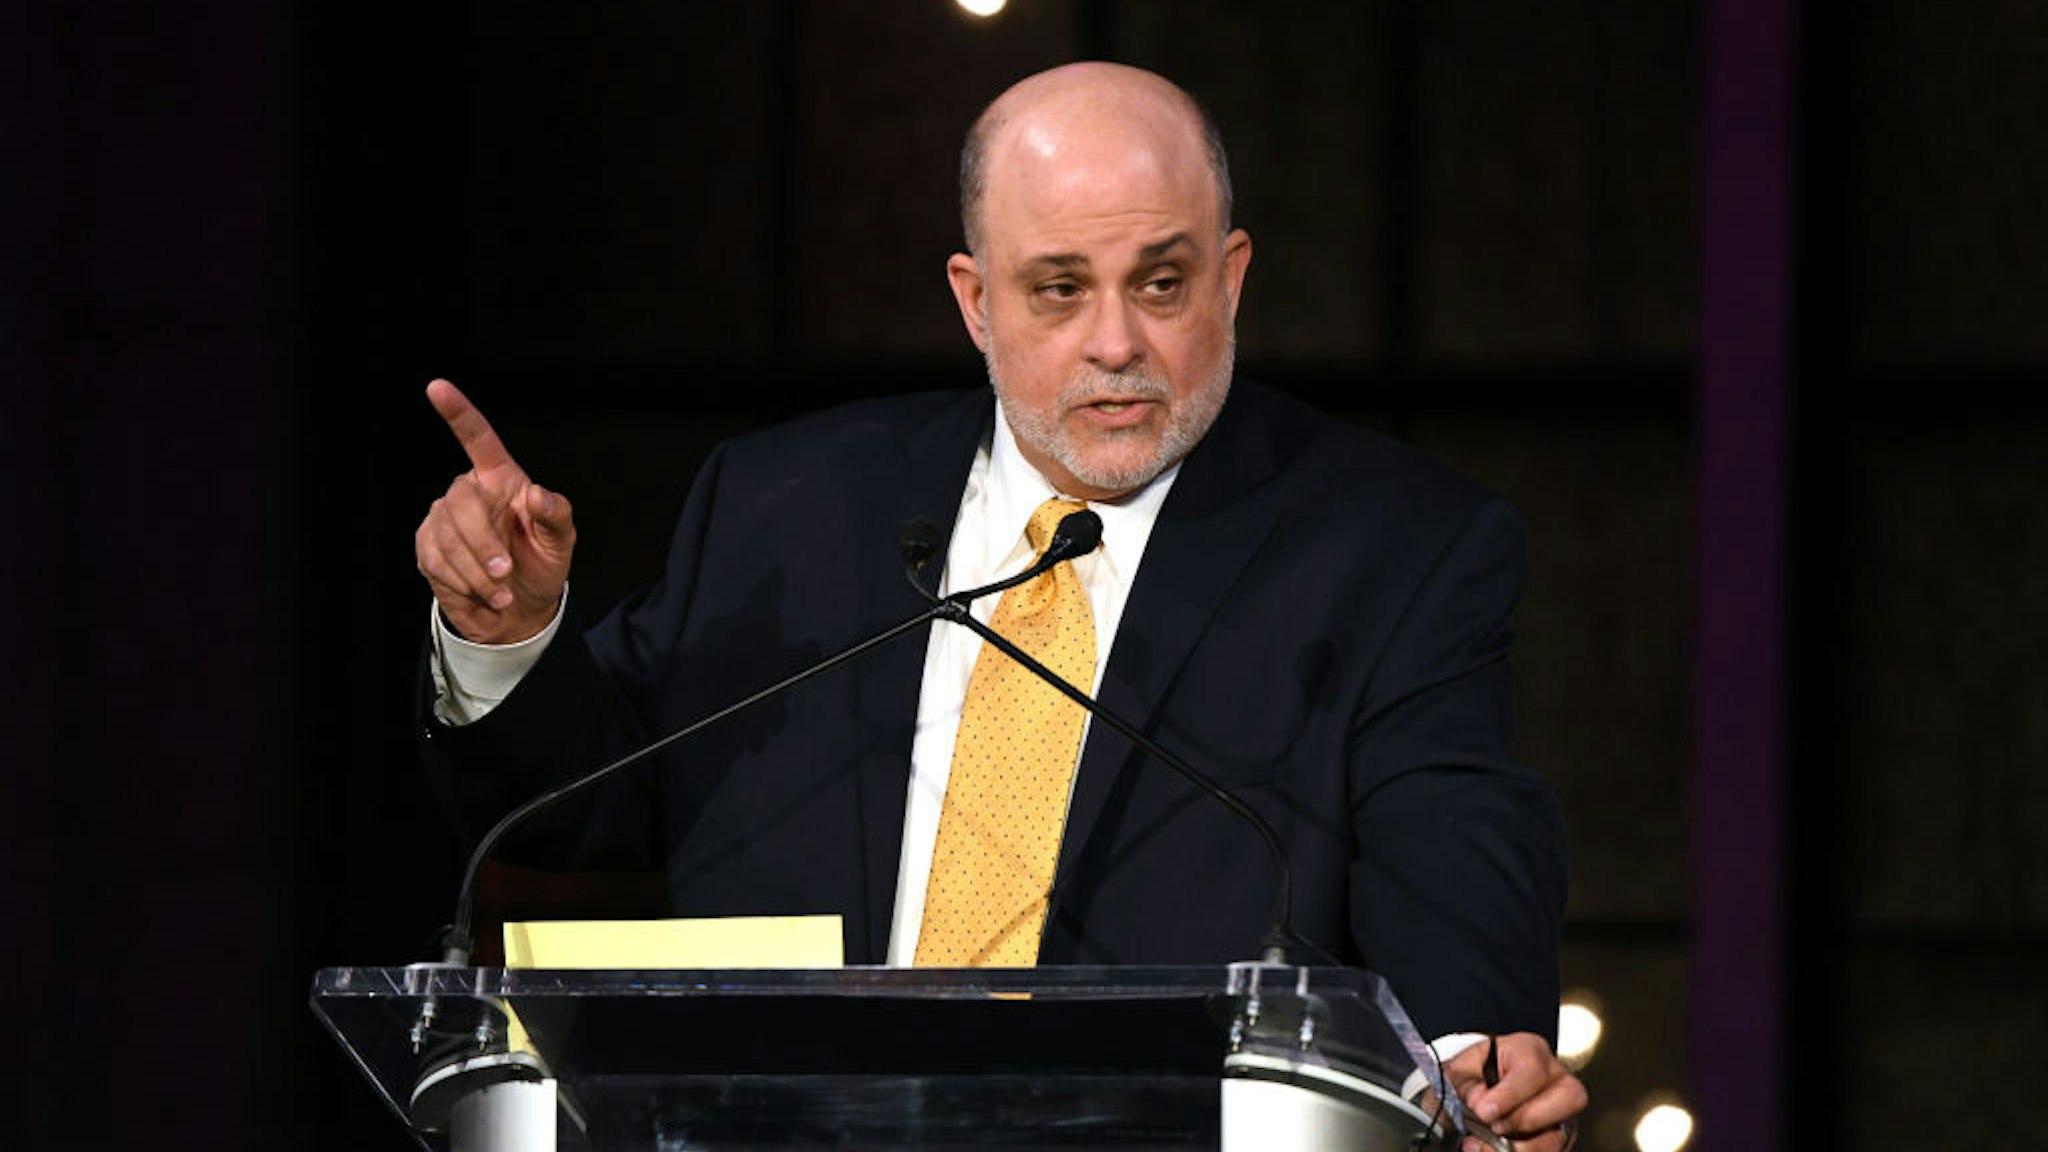 Inductee Mark Levin speaks on stage during Radio Hall Of Fame 2018 Induction Ceremony at Guastavino's on November 15, 2018 in New York City.